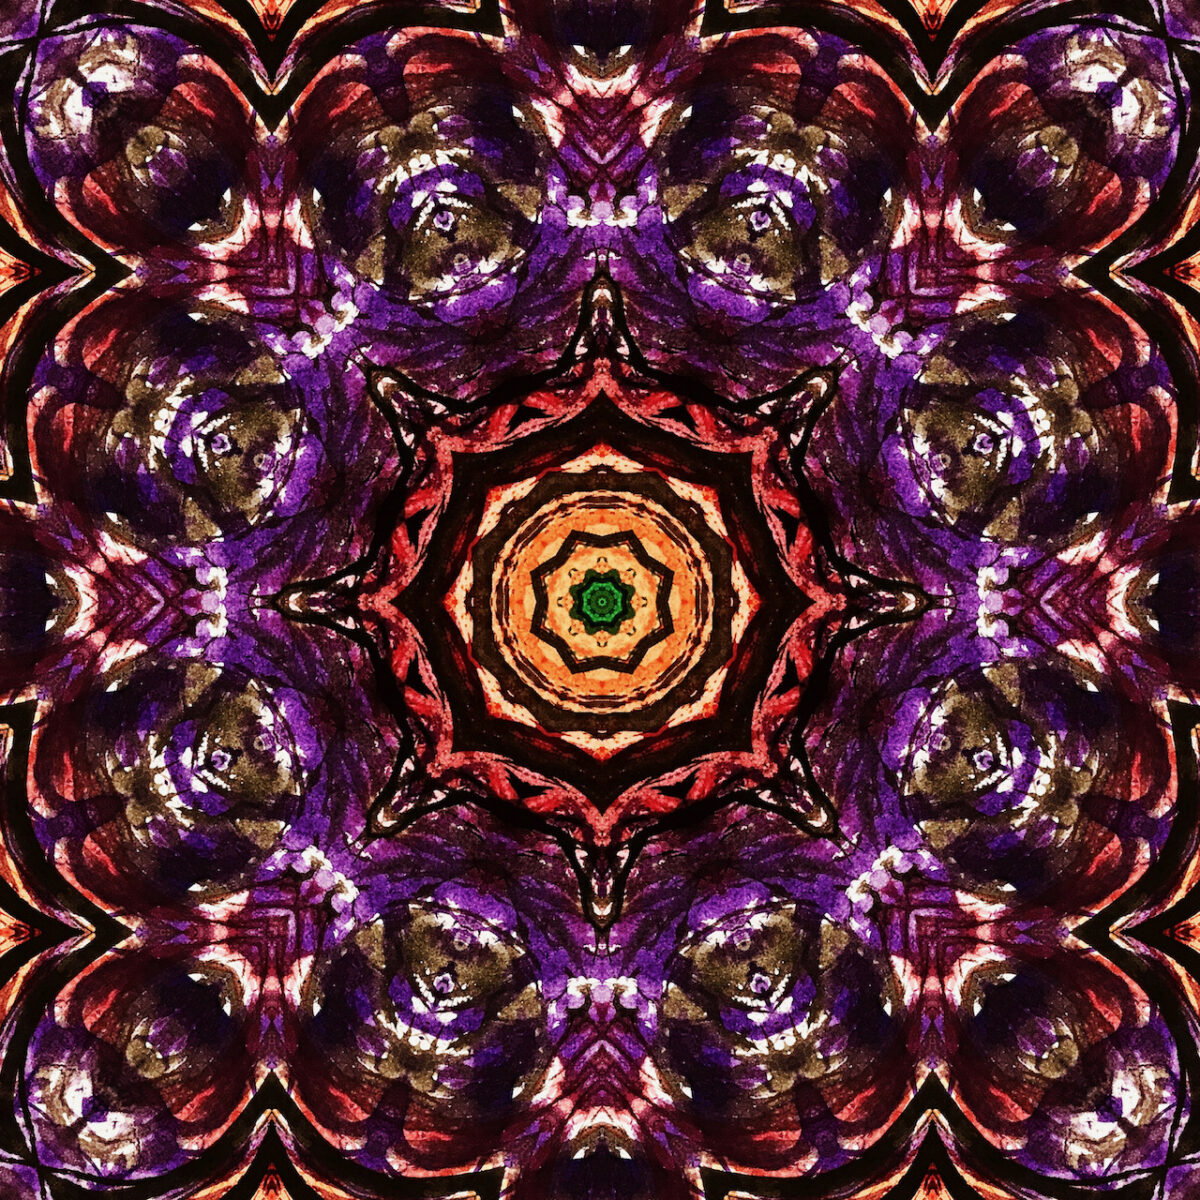 Kaleidoscope art by Mark Bray for this Weekend Update